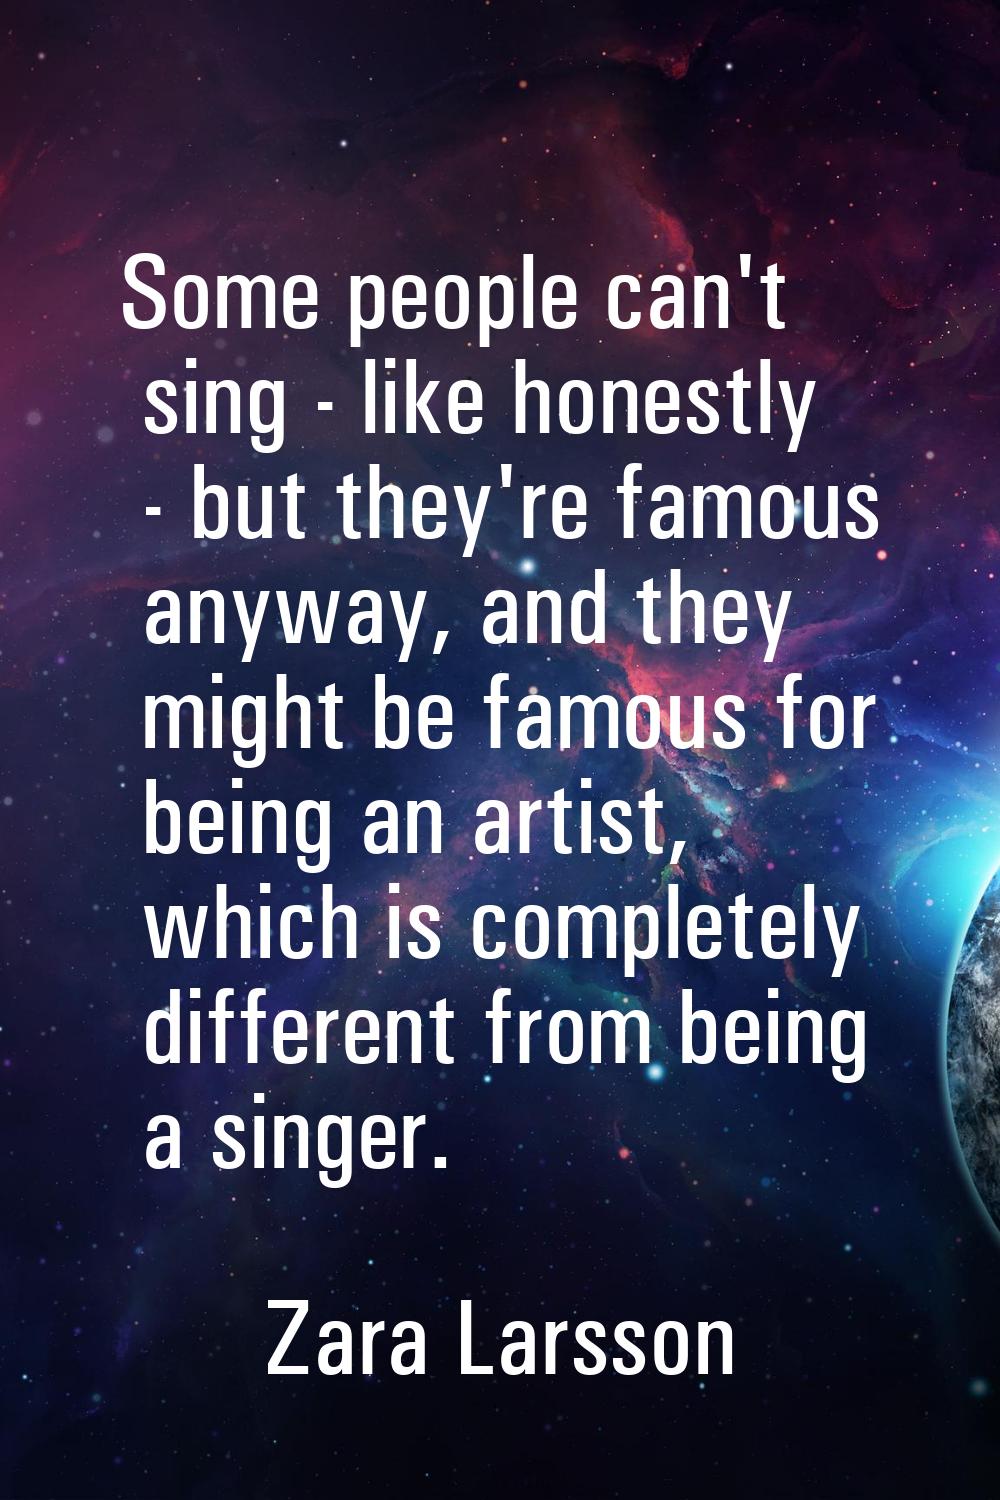 Some people can't sing - like honestly - but they're famous anyway, and they might be famous for be